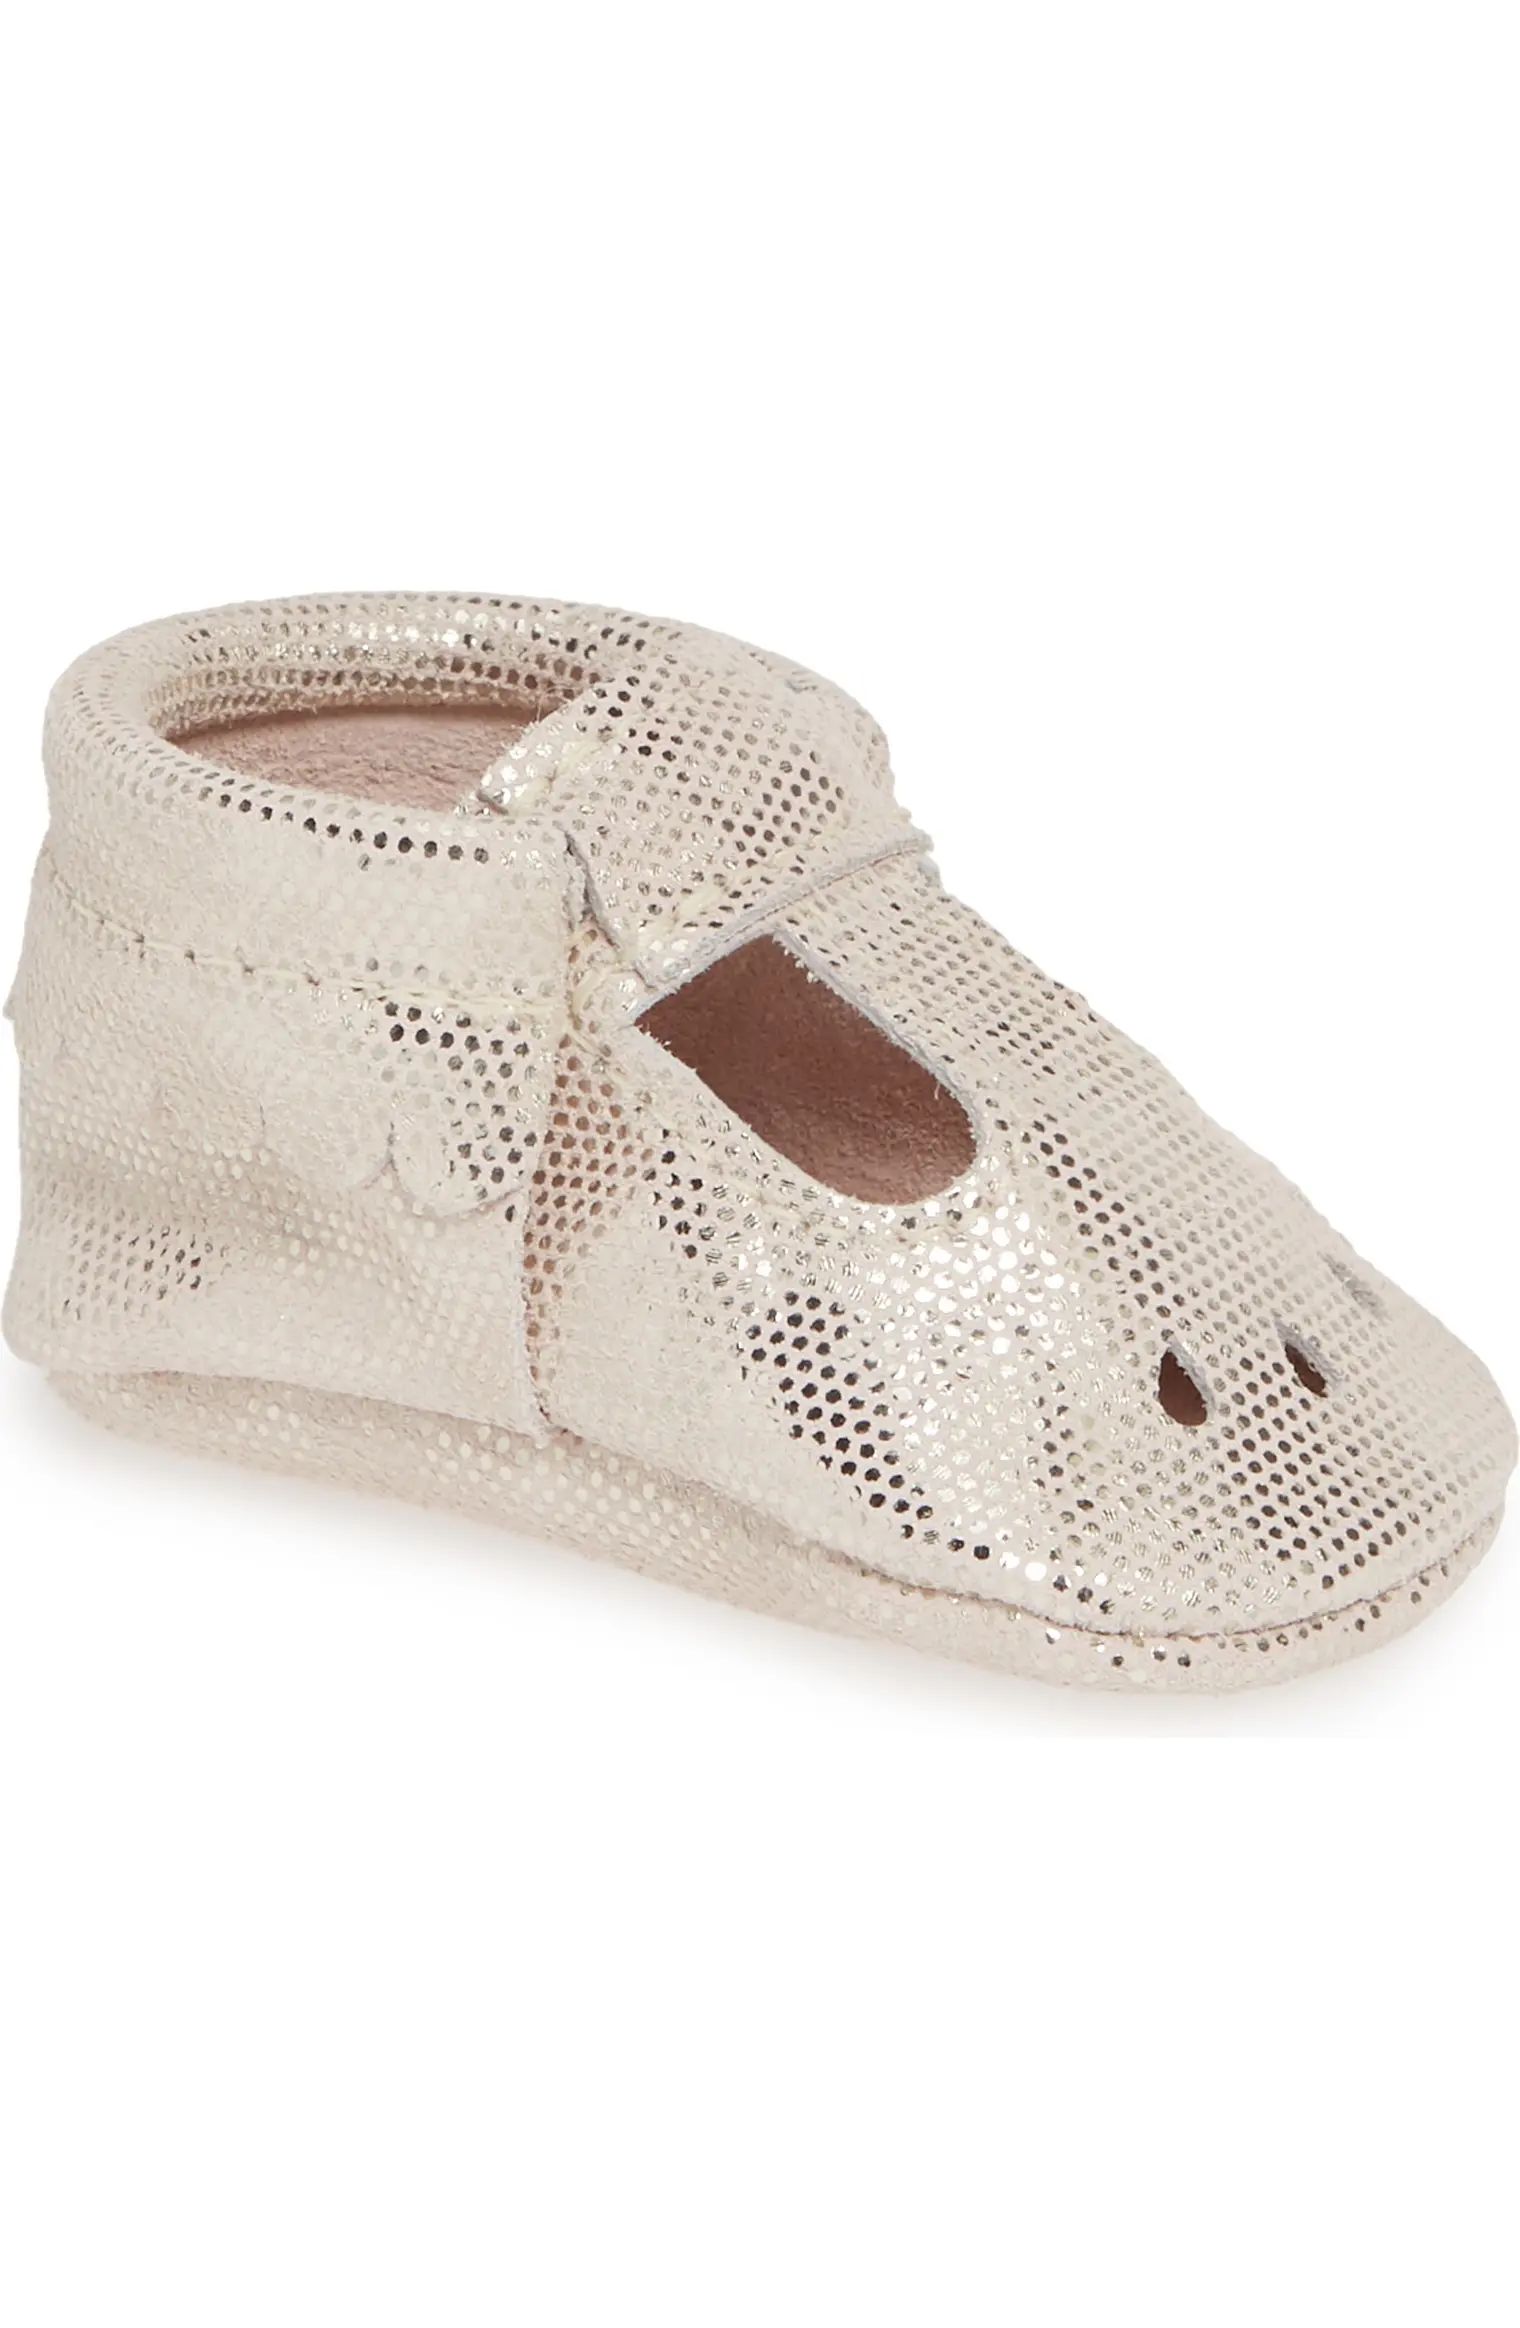 Metallic Dots Perforated Mary Jane | Nordstrom